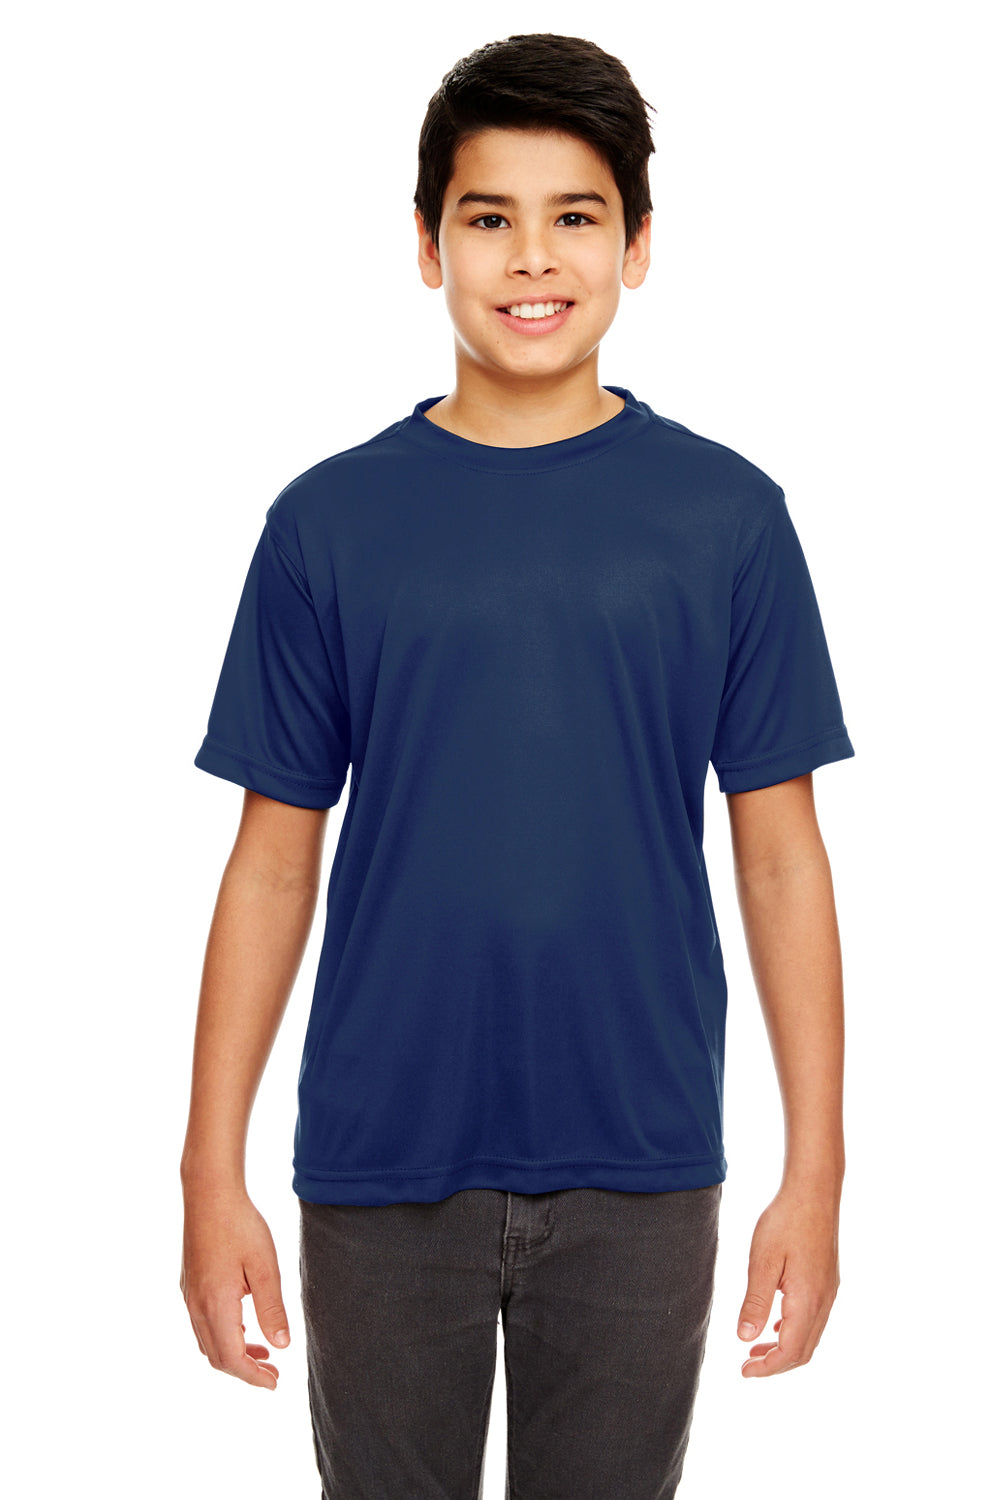 UltraClub 8620Y Youth Cool & Dry Performance Moisture Wicking Short Sleeve Crewneck T-Shirt Navy Blue Front